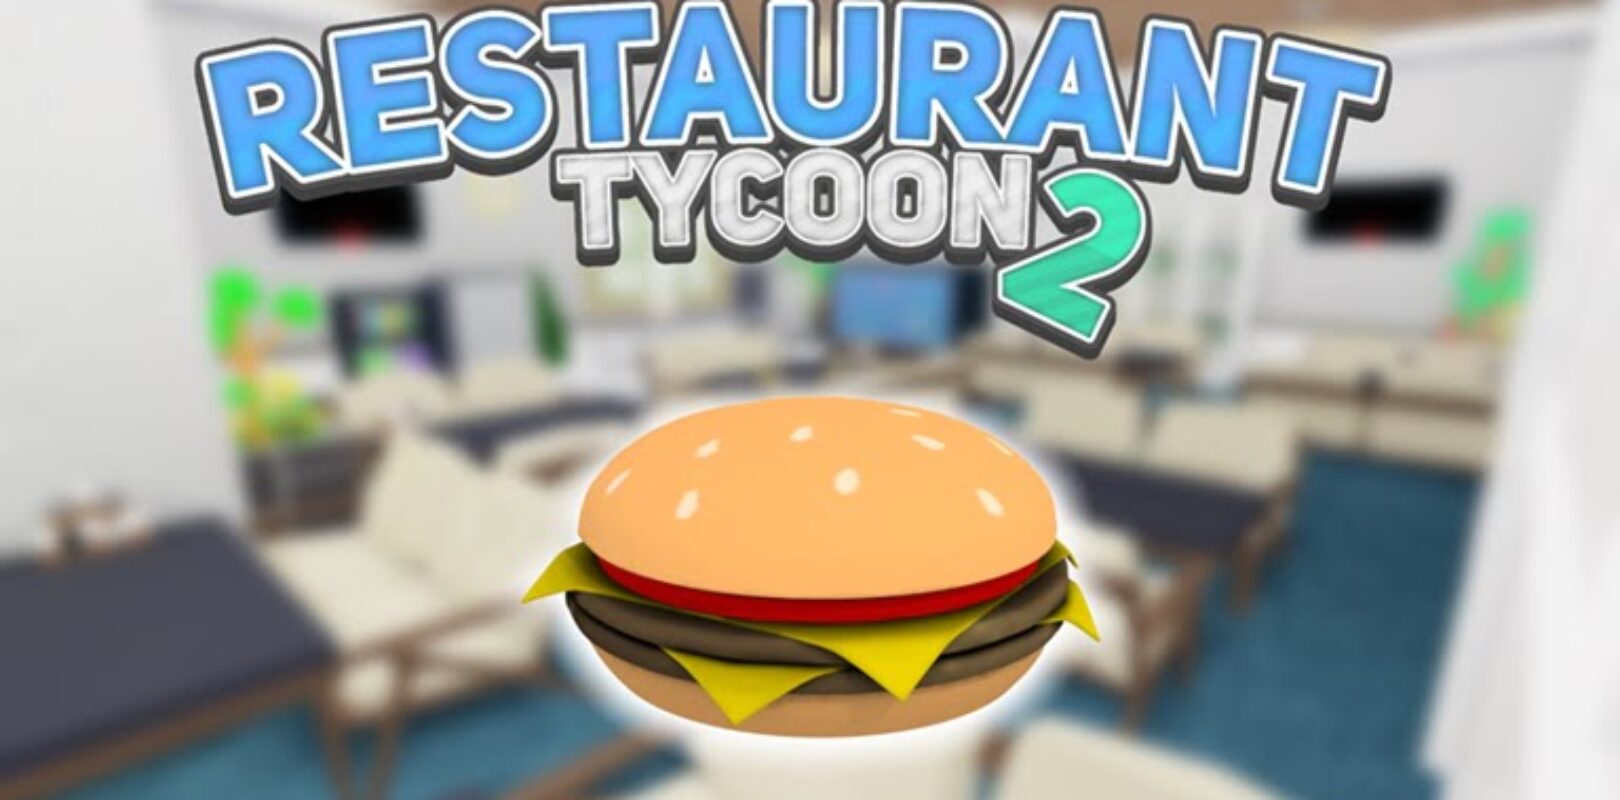 Restaurant Tycoon 2 Codes 2020 Pivotal Gamers - aesthetic roblox restaurant tycoon 2 design